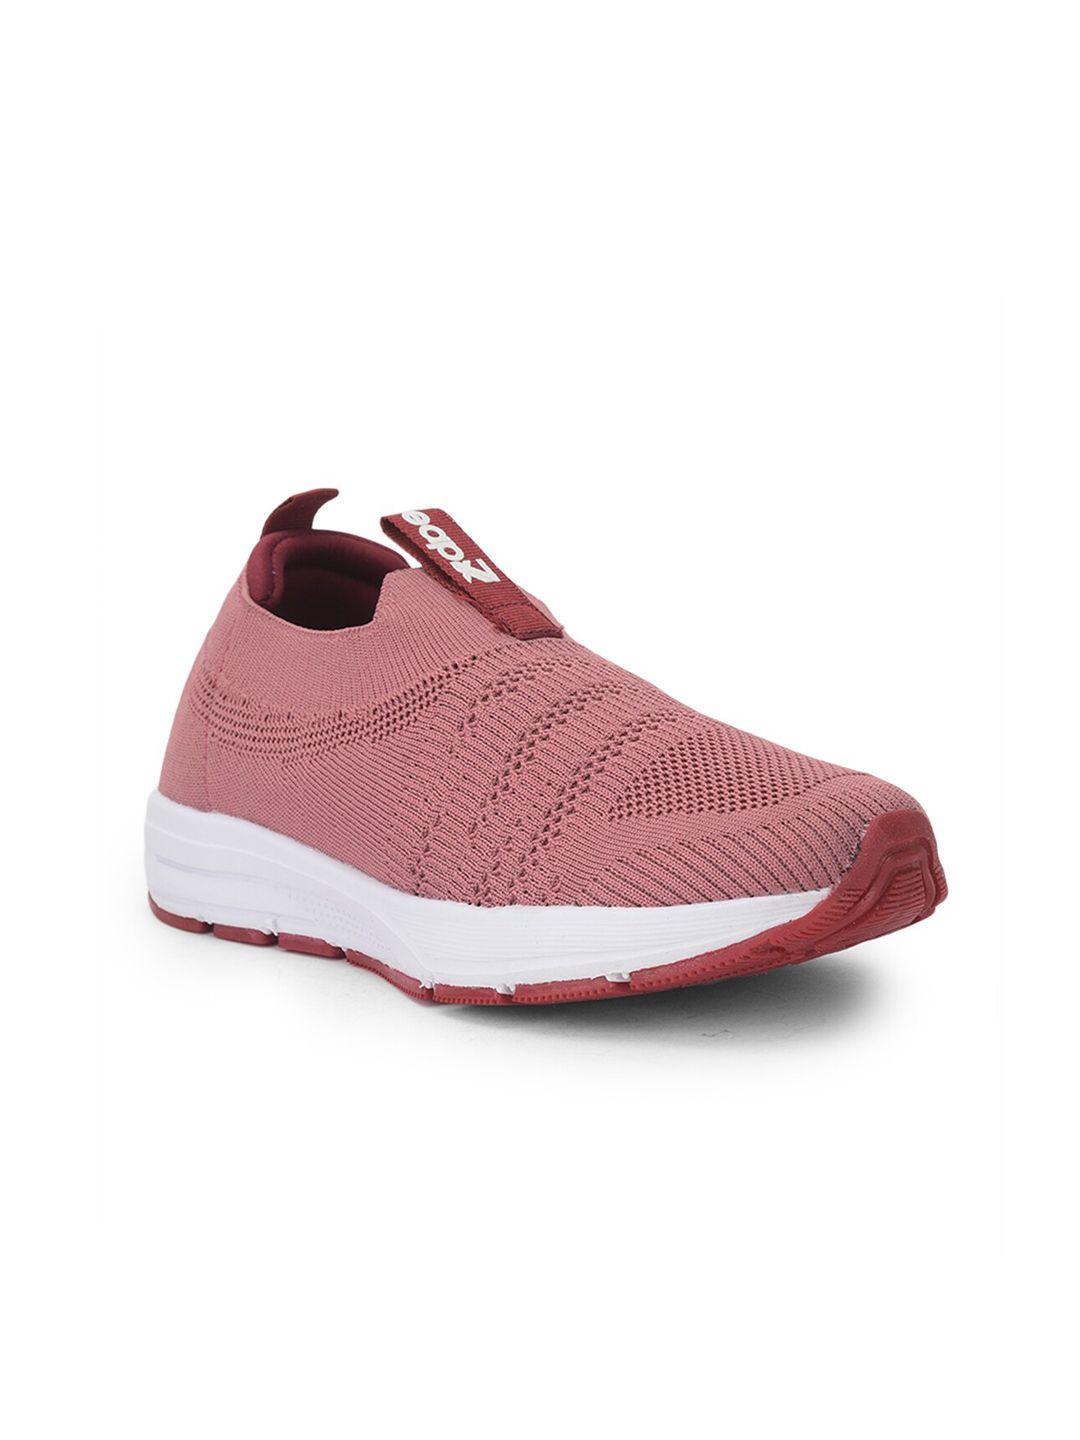 liberty women coral running non-marking shoes